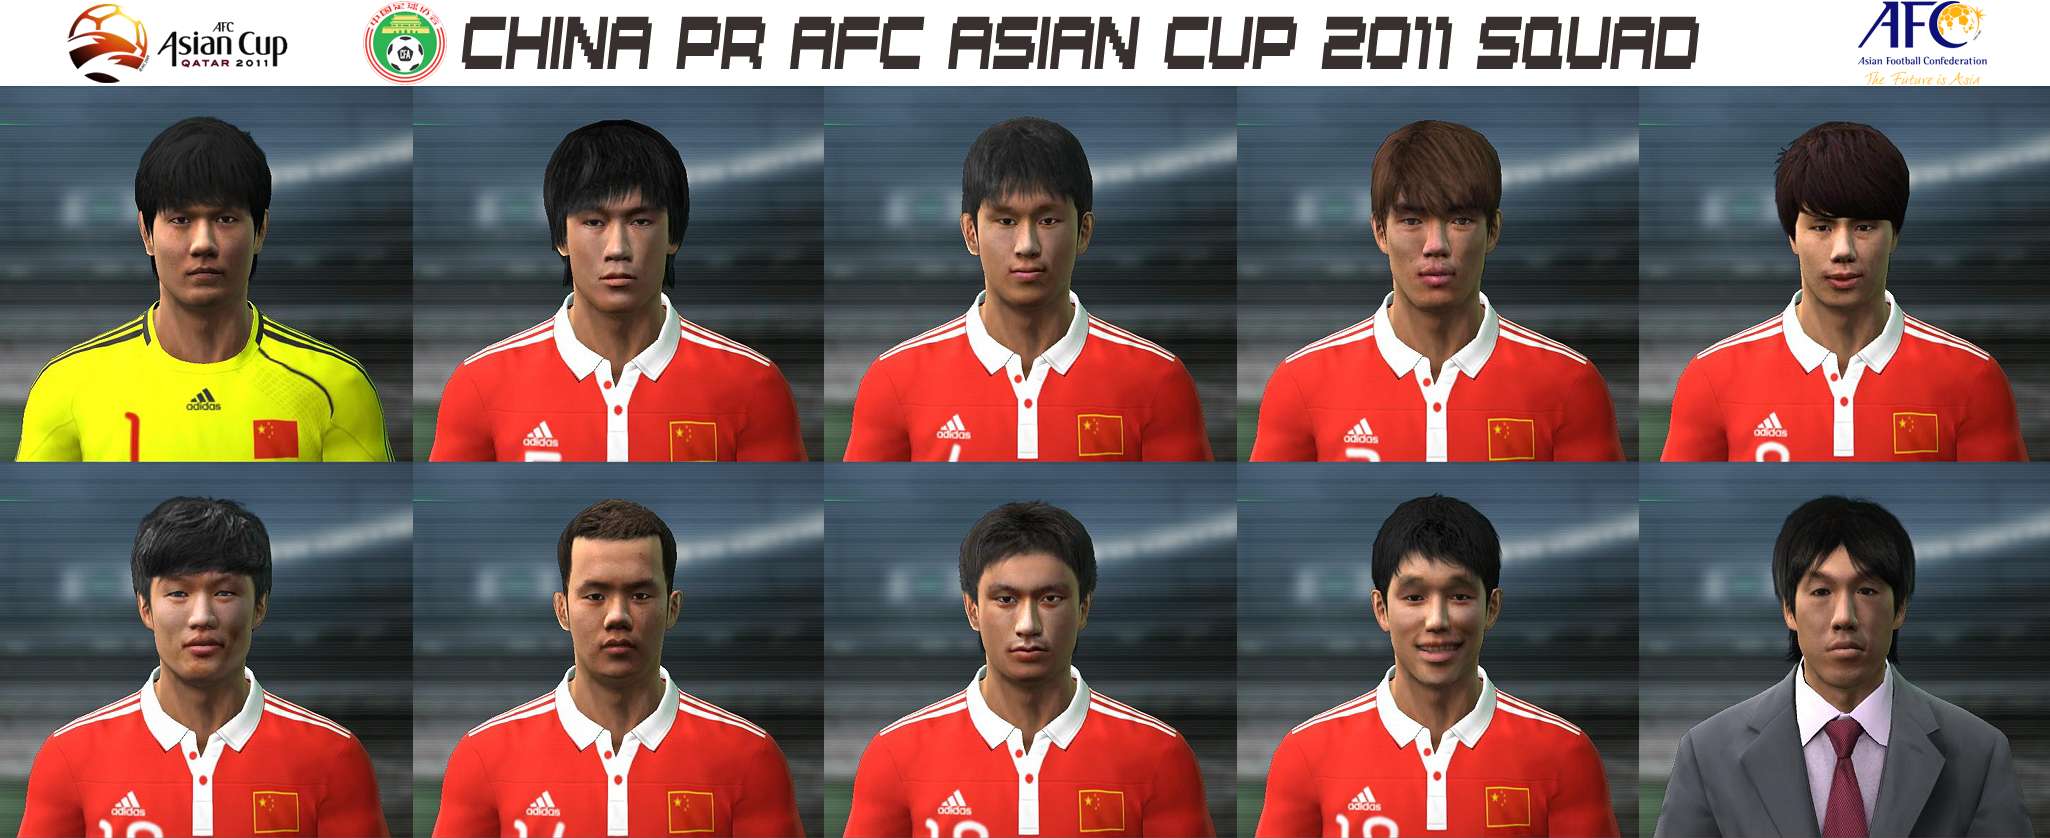 AFC Asian Cup Scoreboard Final by marthchyld - Pro Evolution Soccer 2011 at  ModdingWay